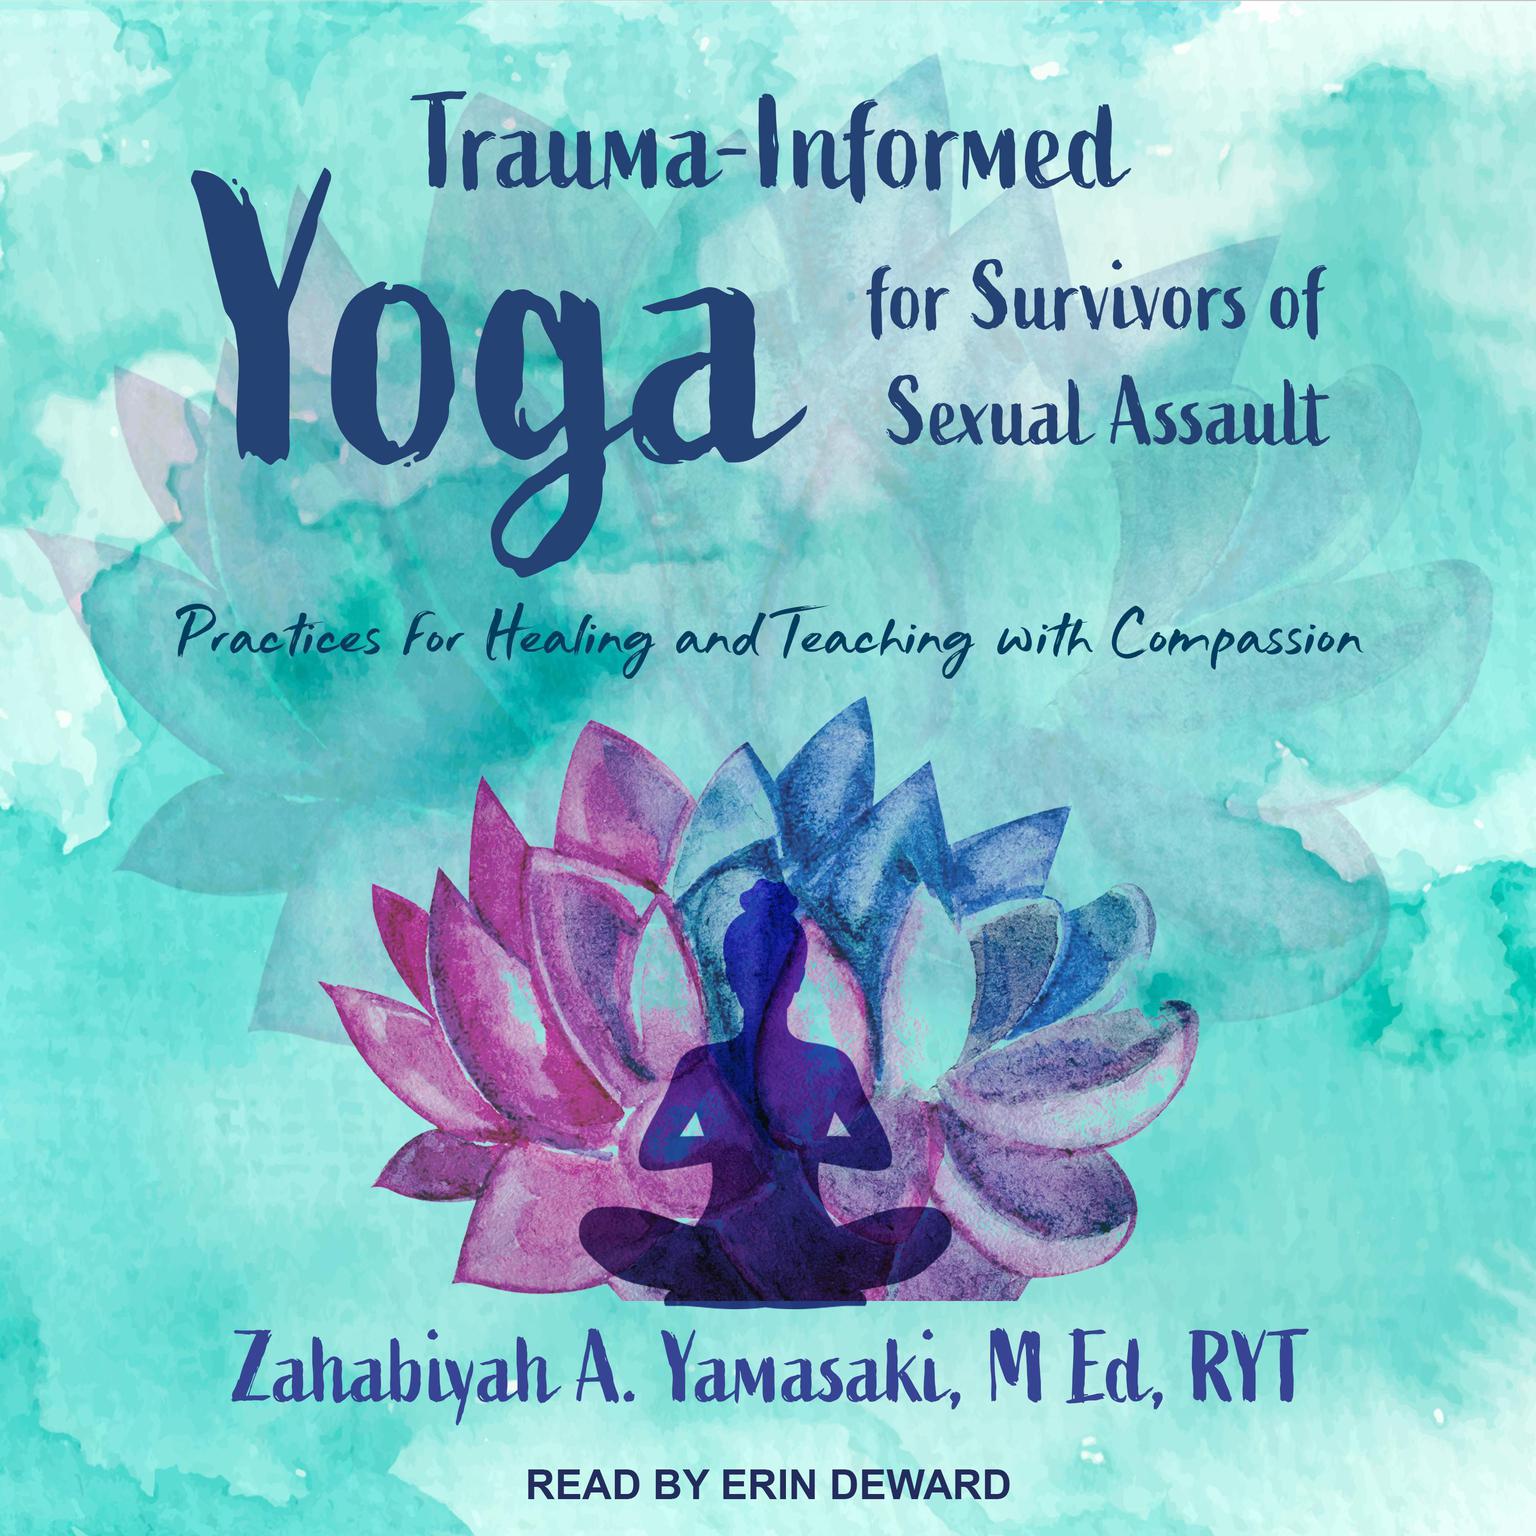 Trauma-Informed Yoga for Survivors of Sexual Assault: Practices for Healing and Teaching with Compassion Audiobook, by Zahabiyah A. Yamasaki, M Ed, RYT